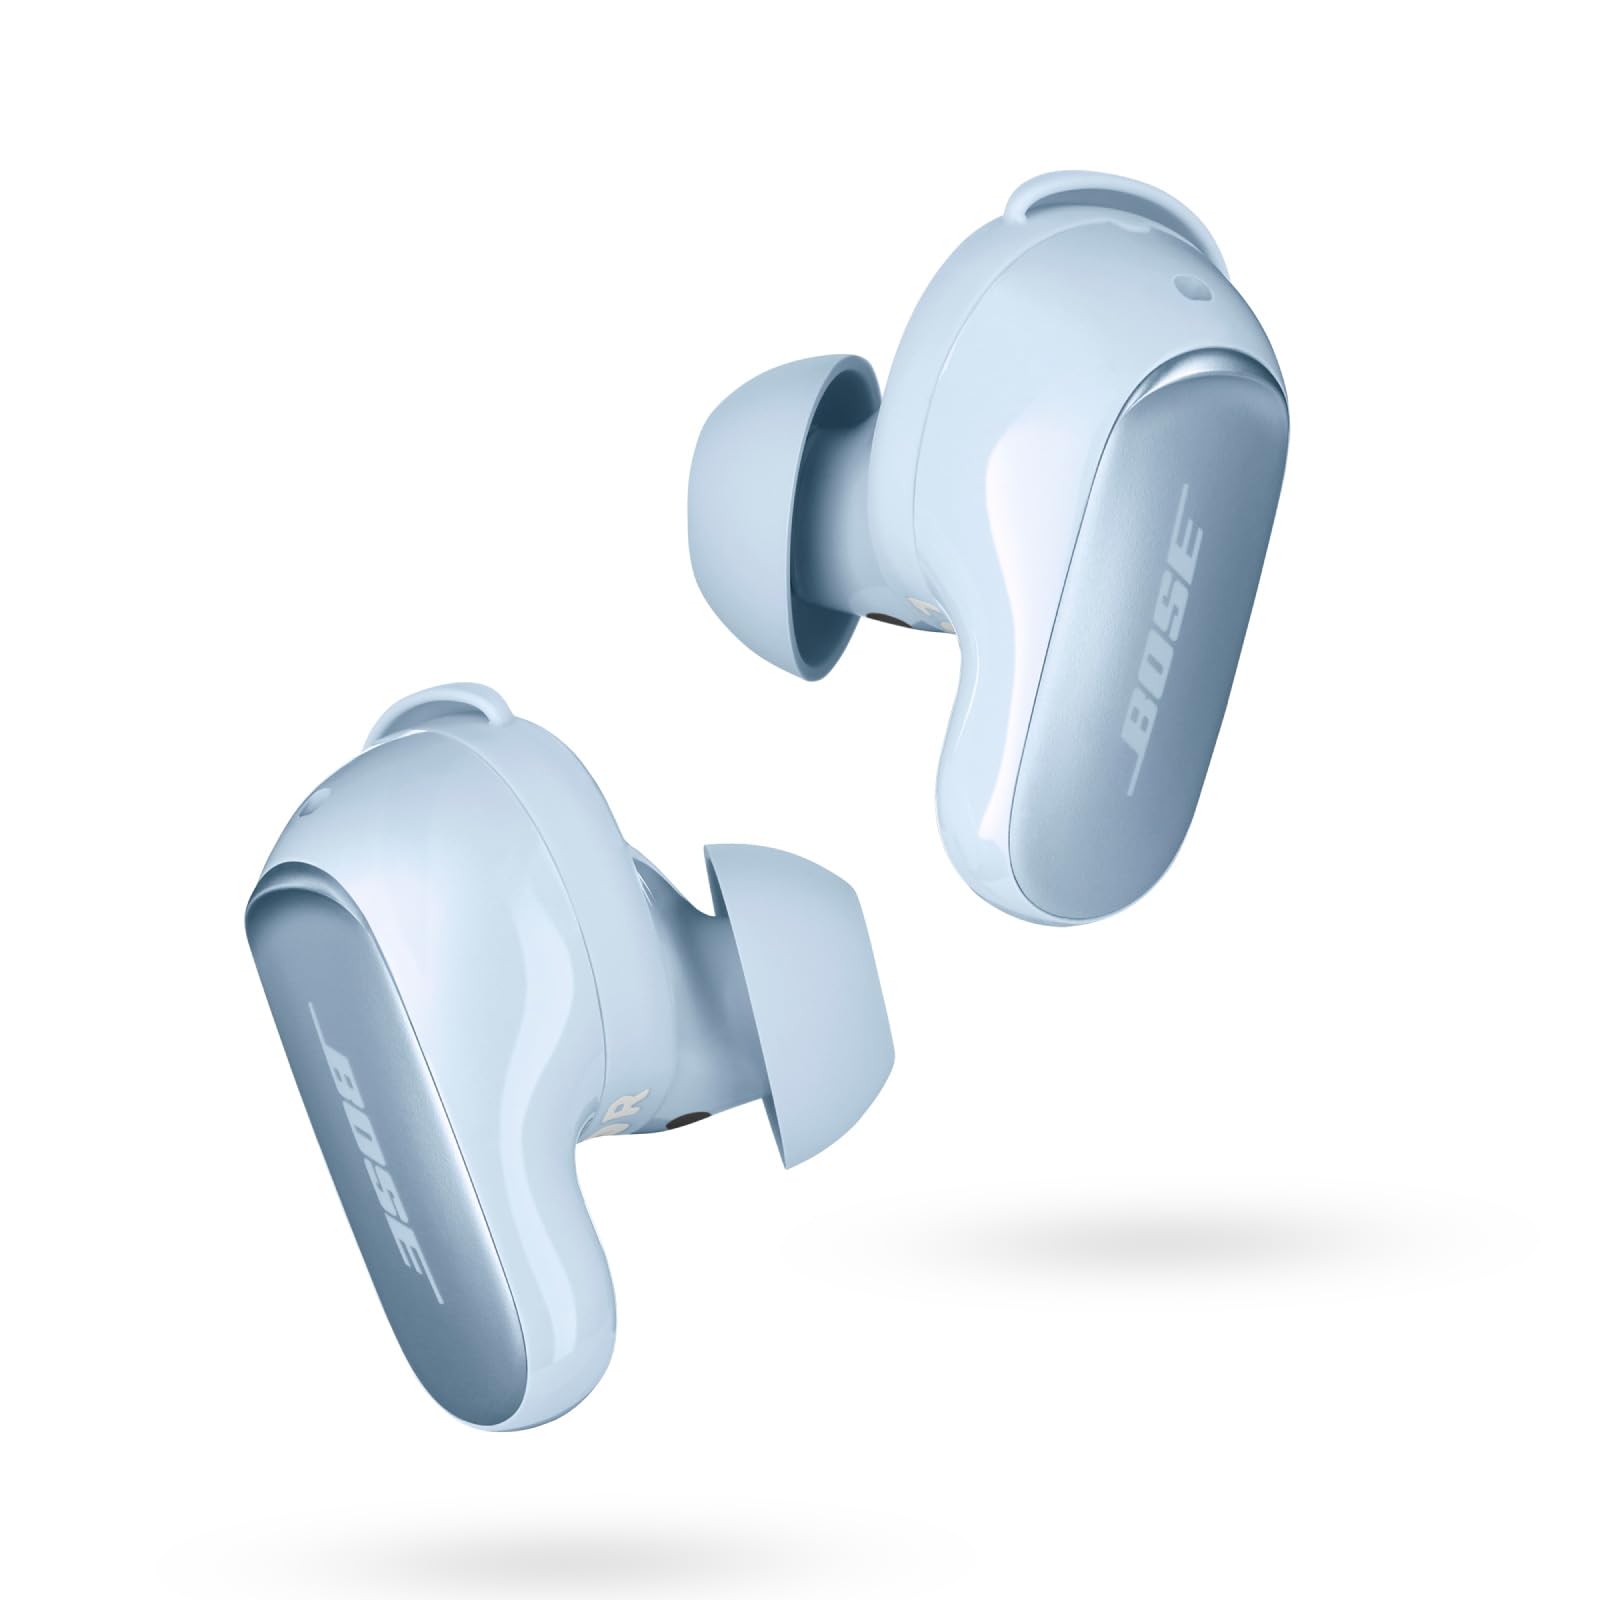 NEW Bose QuietComfort Ultra Wireless Noise Cancelling Earbuds, Bluetooth Noise Cancelling Earbuds with Spatial Audio and World-Class Noise Cancellation, Moonstone Blue - Limited Edition